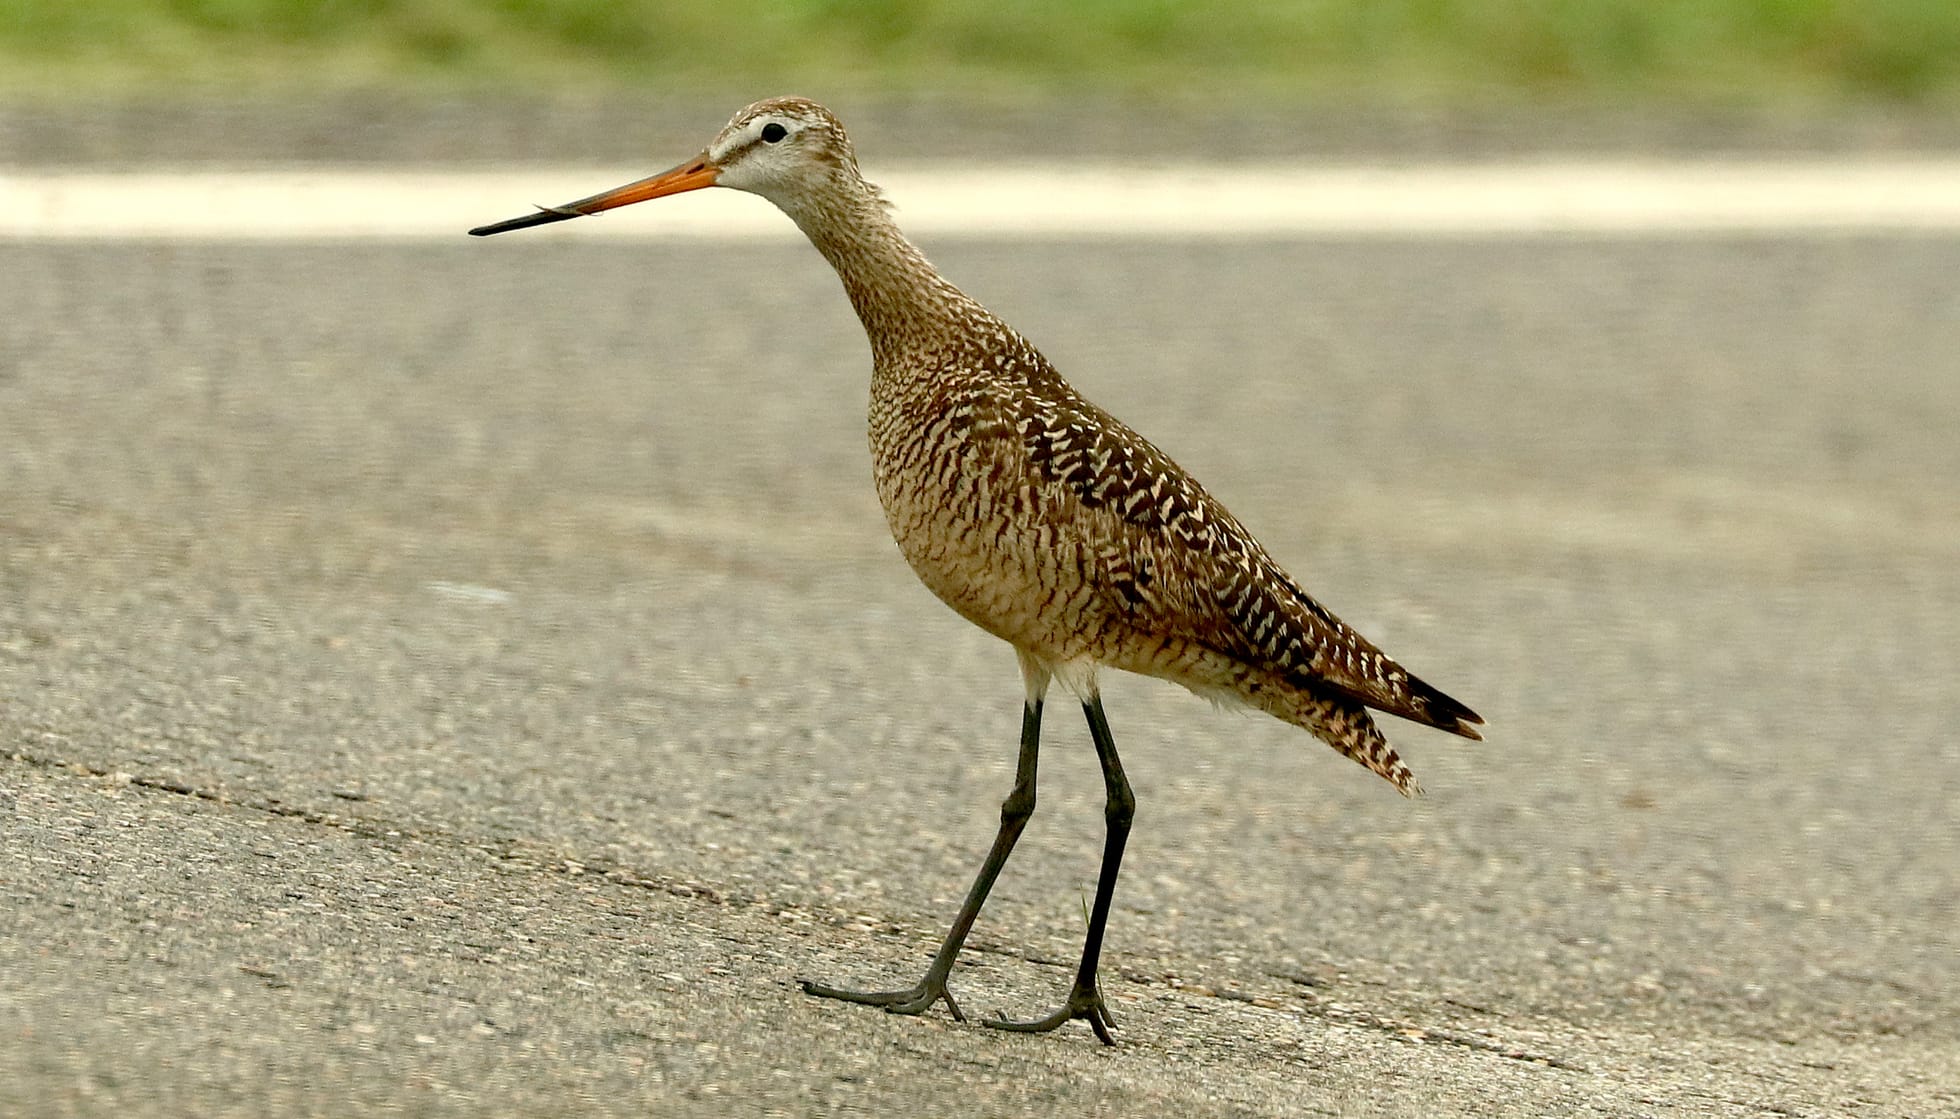 Marbled Godwit standing on a road